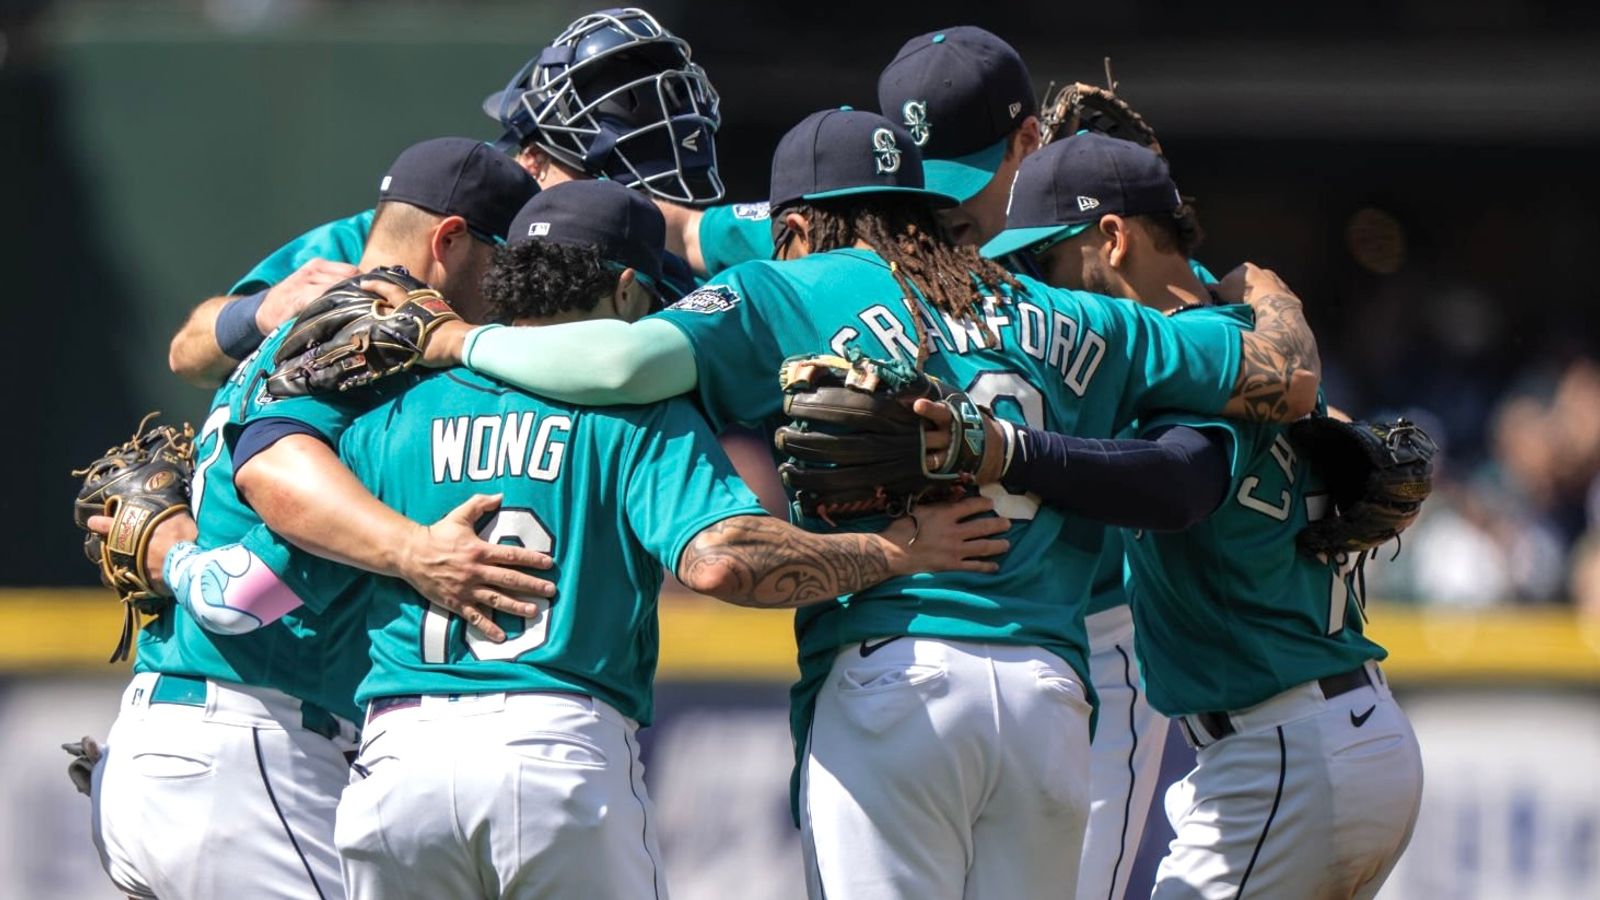 Luis Castillo strikes out 10 as Mariners beat Pirates 5-0